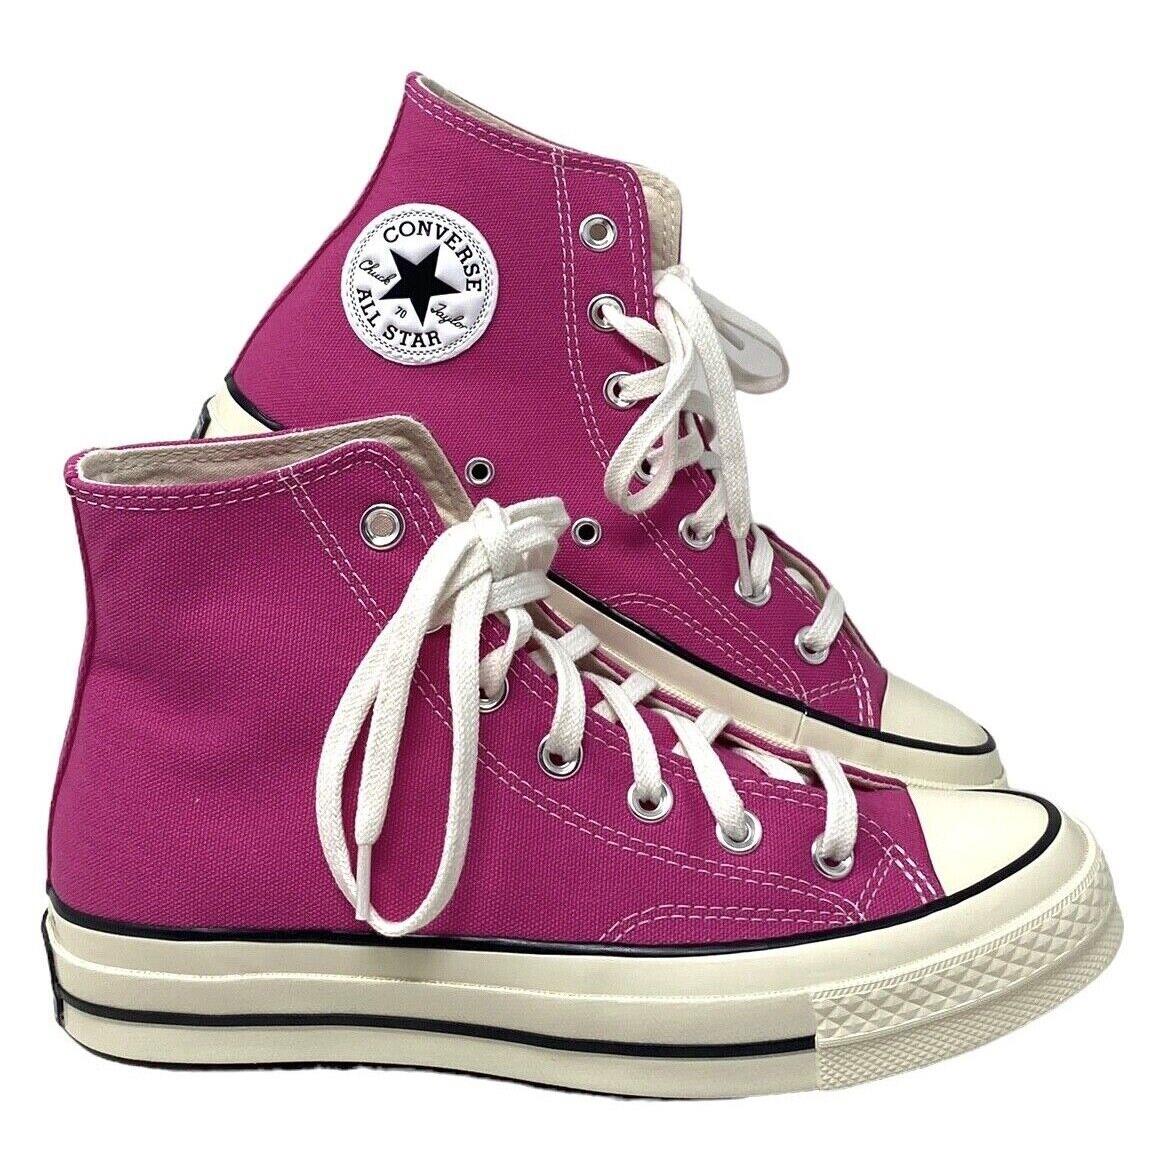 Converse Chuck 70 Skate High Shoes Lucky Pink Women Size Canvas Sneakers A04594C